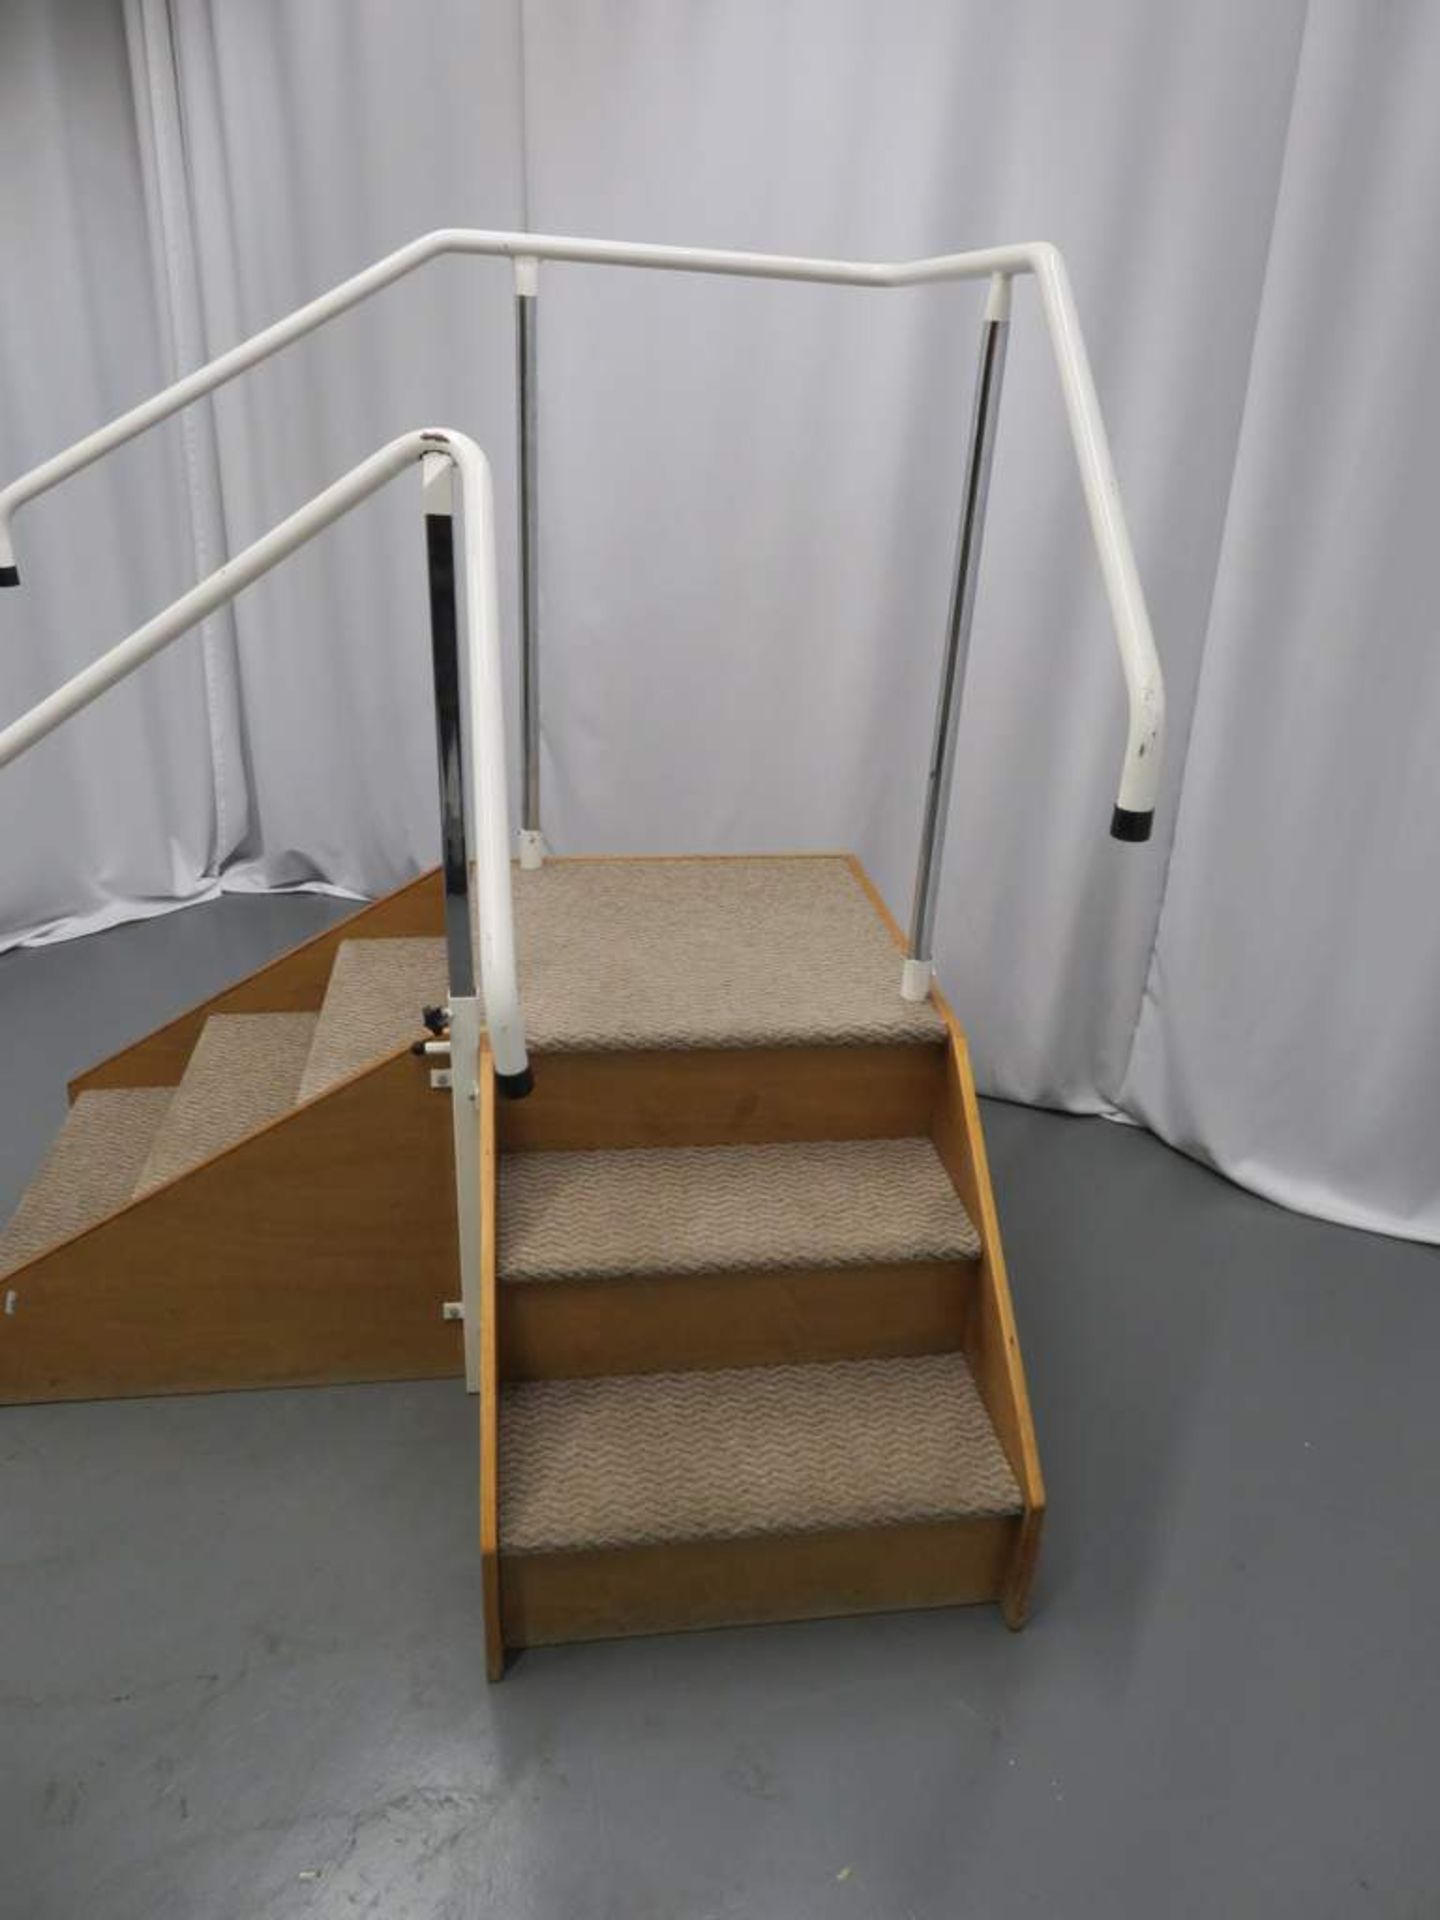 Rehabilitation Stair Case Assembly. - Image 4 of 5